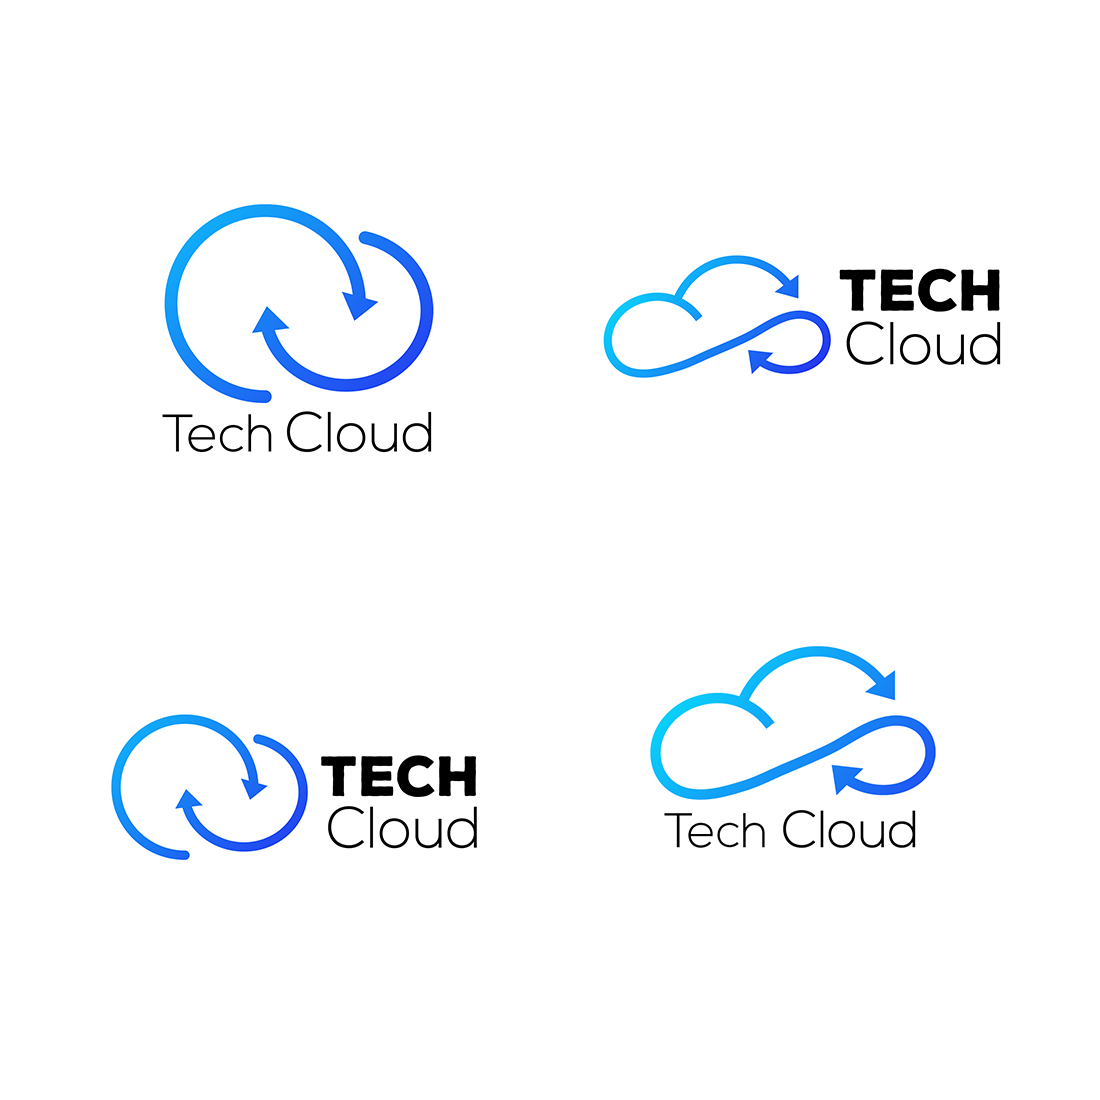 Tech Cloud Logo-Pack created by MabdyManan.